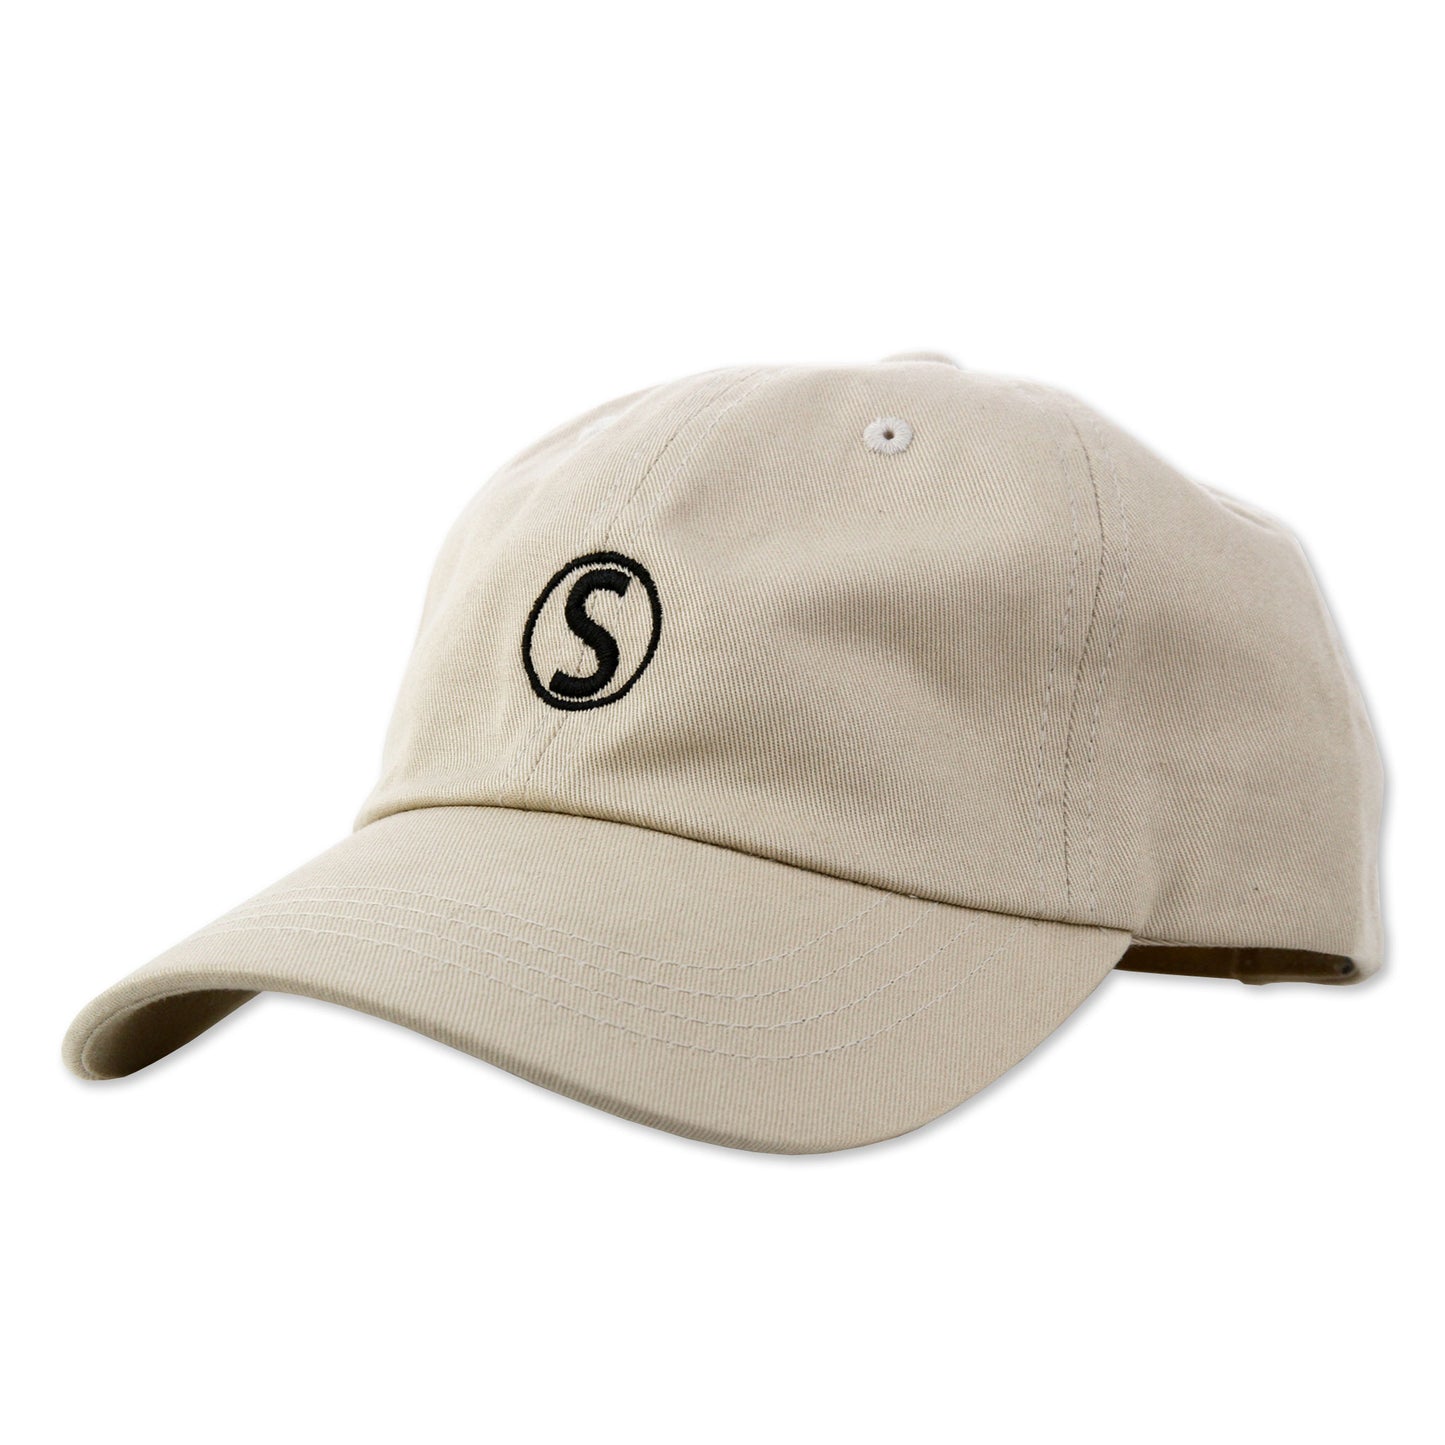 DAD HAT EMBROIDERED : TAN